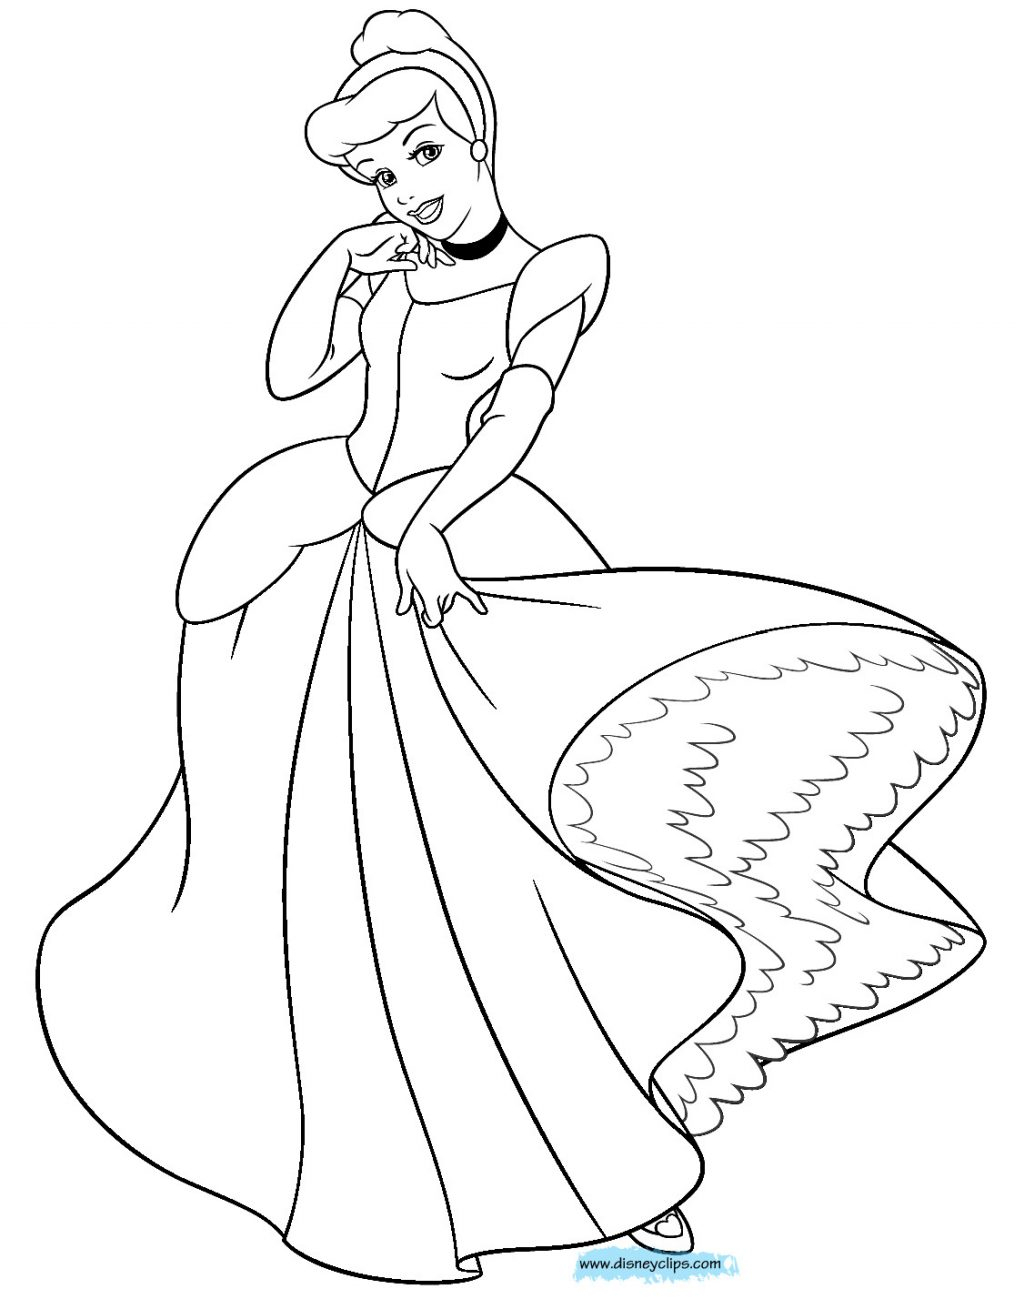 Free Cinderella Coloring Pages Coloring Page Cinderella Coloring Page Wicked Stepmother Pages New